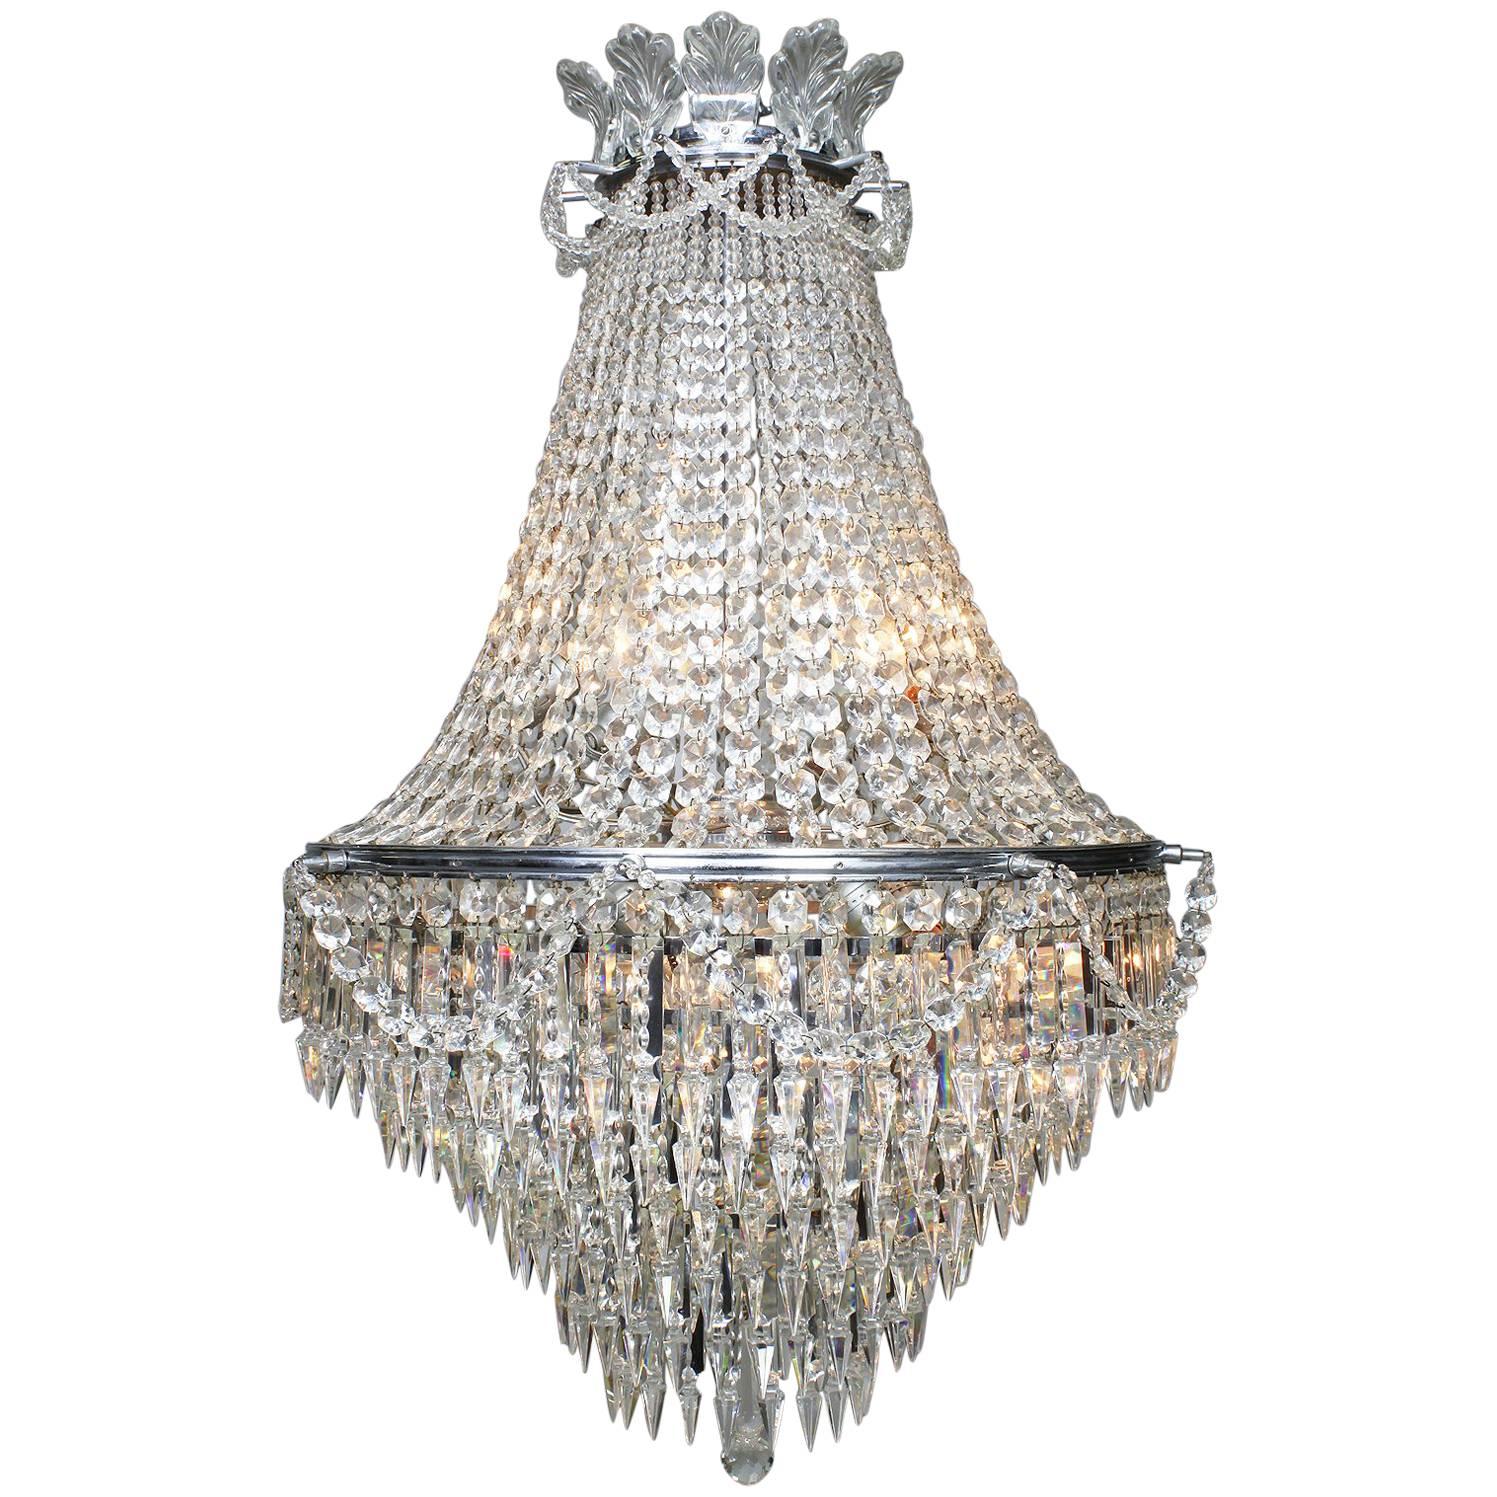 French Belle Epoque 19th-20th Century Cut-Glass Chandelier, Baccarat Attributed